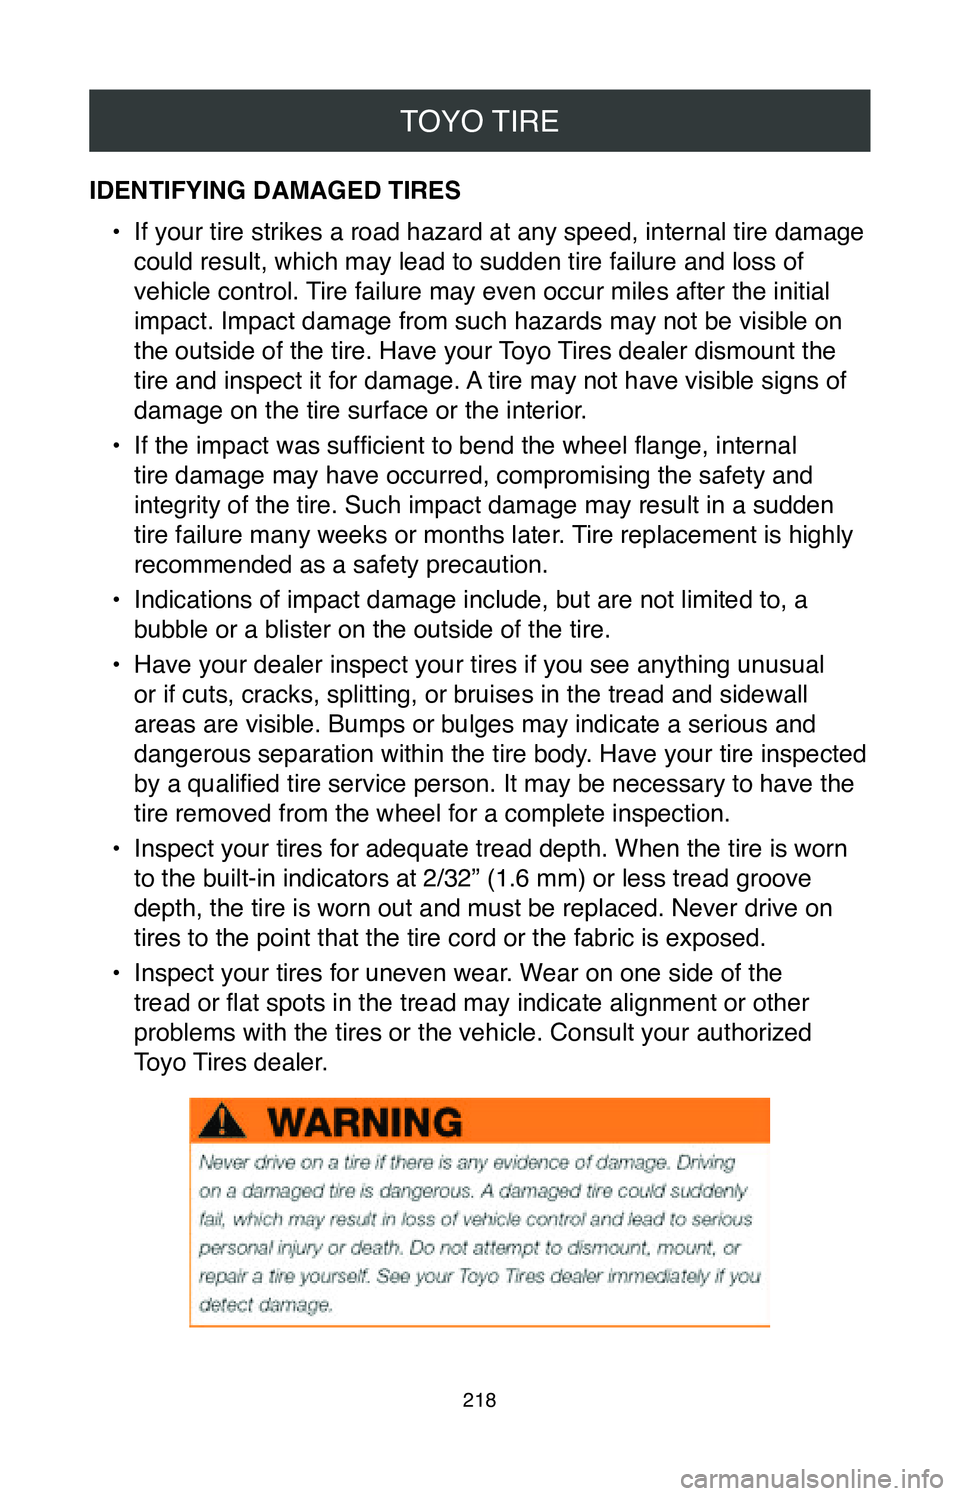 TOYOTA COROLLA 2020  Warranties & Maintenance Guides (in English) TOYO TIRE
218
IDENTIFYING DAMAGED TIRES•
 If your tire strikes a road hazard at any speed, internal tire damage 
could result, which may lead to sudden tire failure and loss of 
vehicle control. Tir